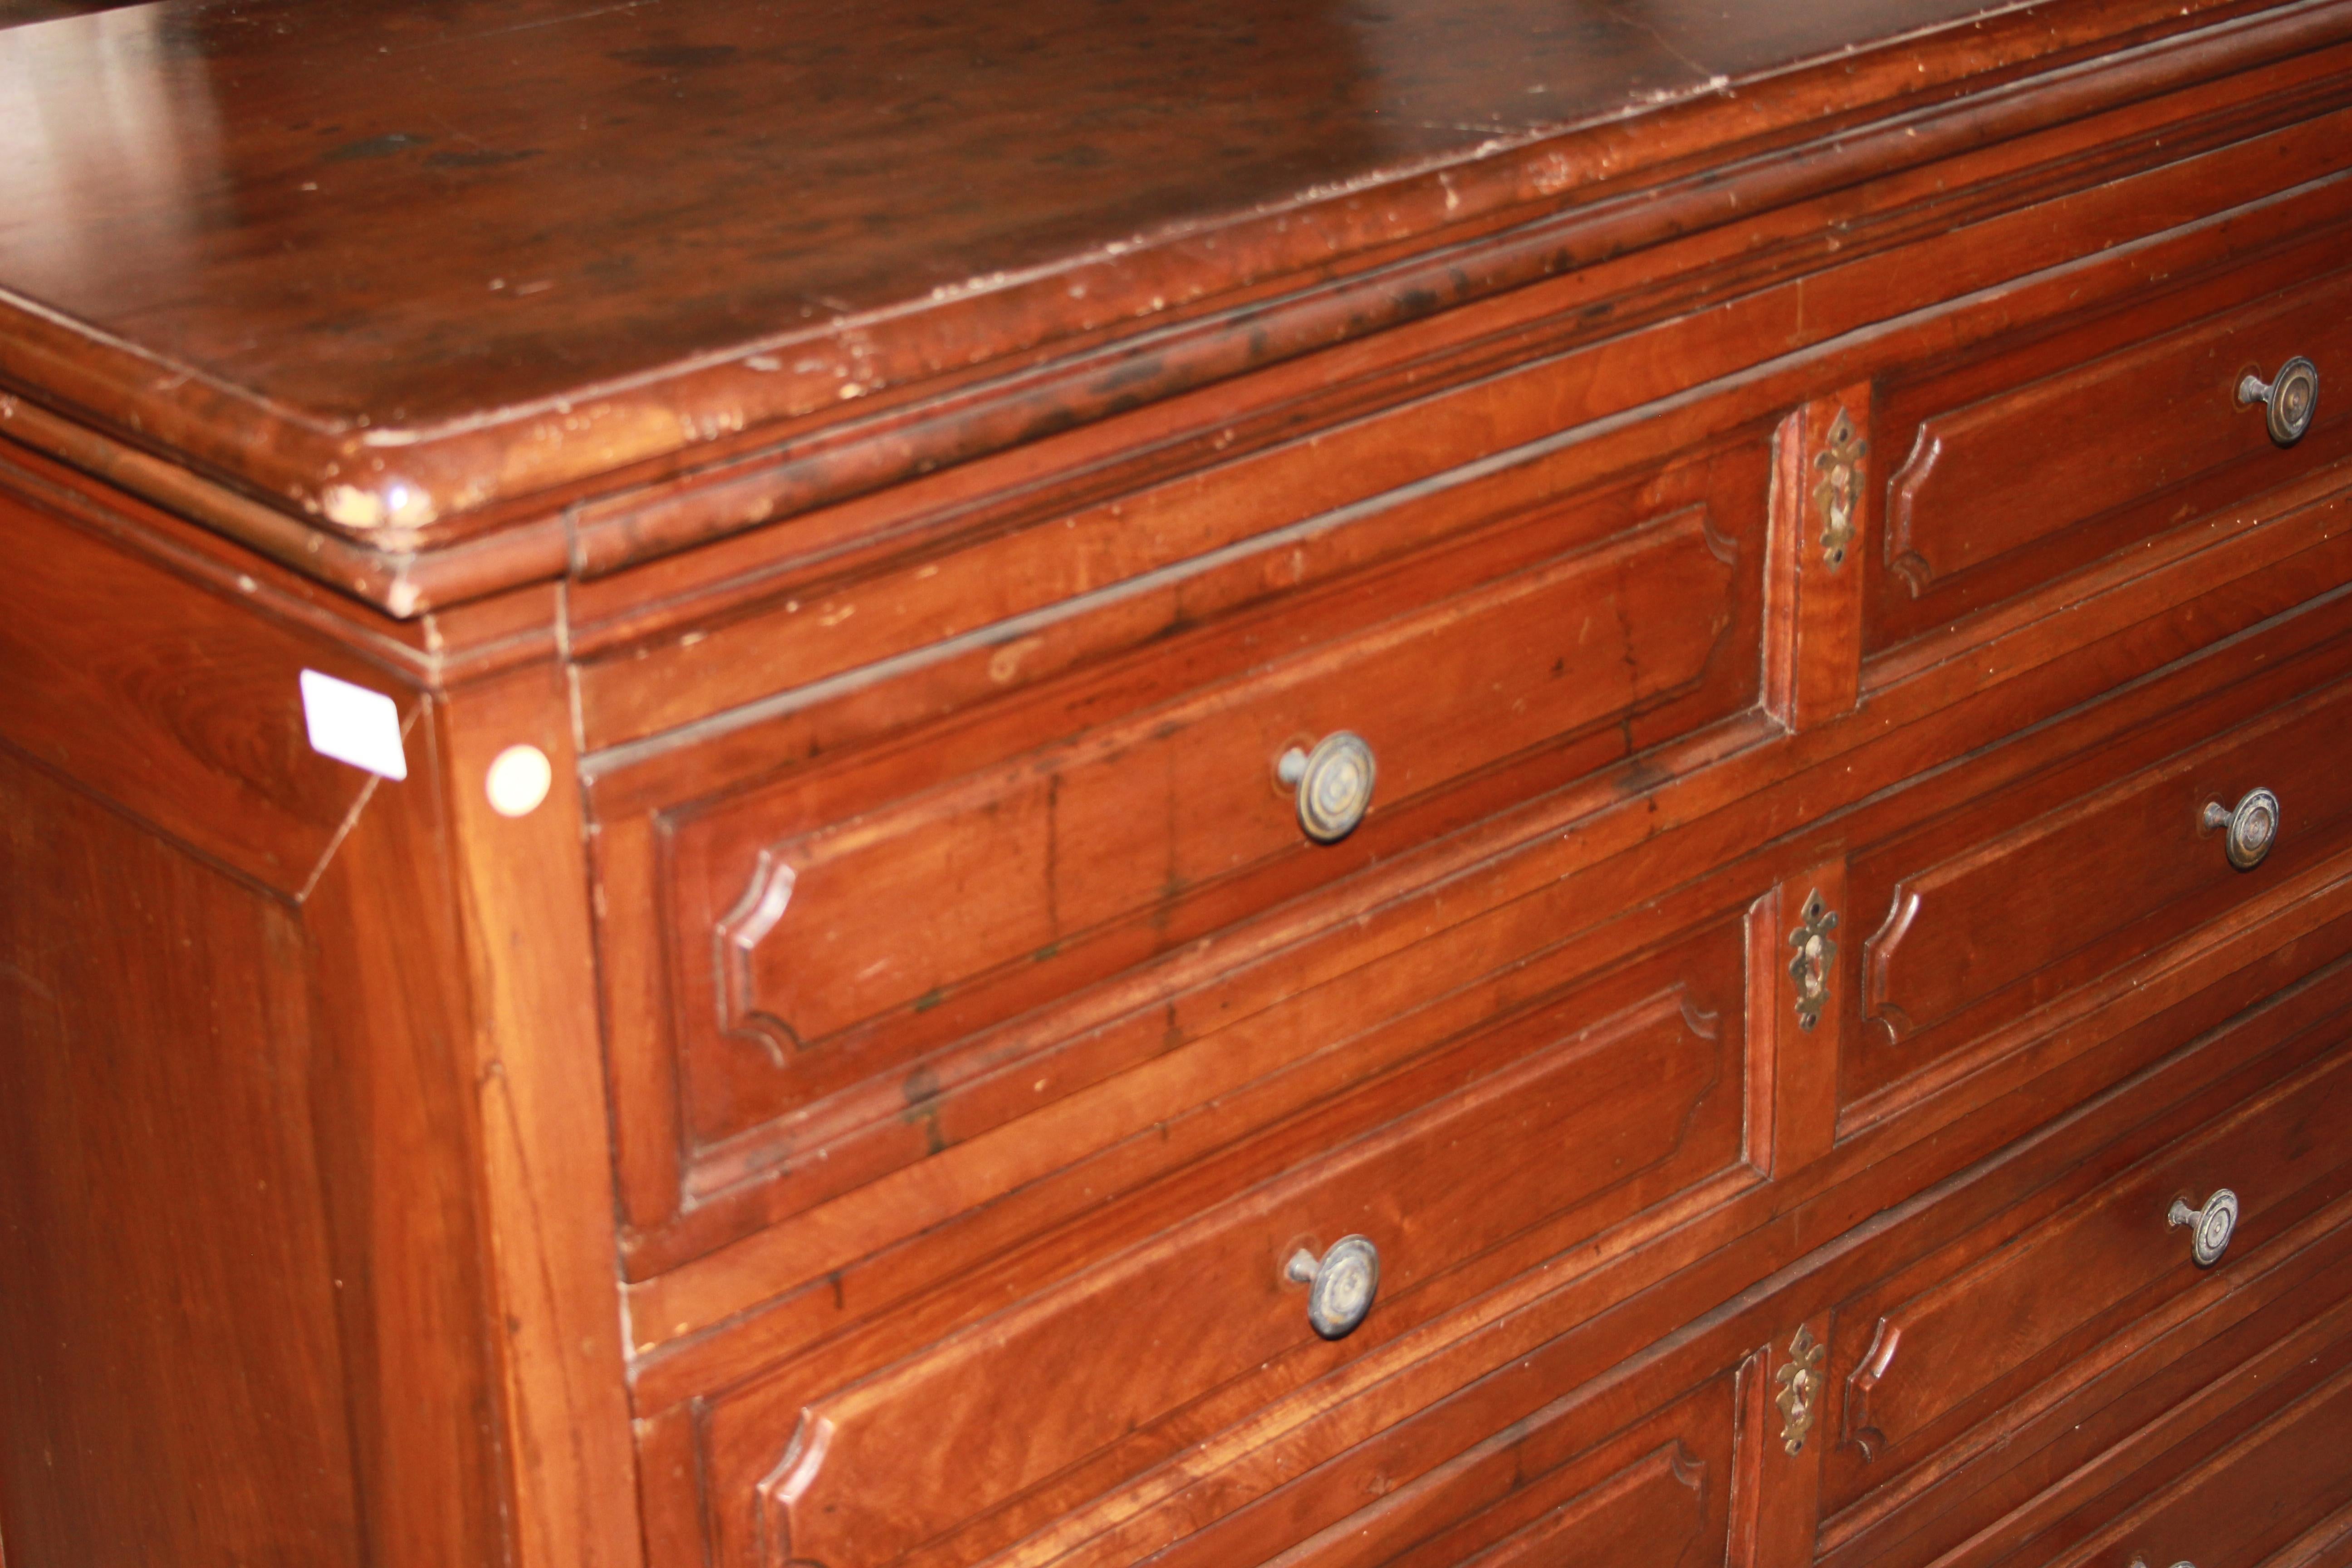  Italian chest of drawers from the 1600s in walnut wood In Excellent Condition For Sale In Barletta, IT